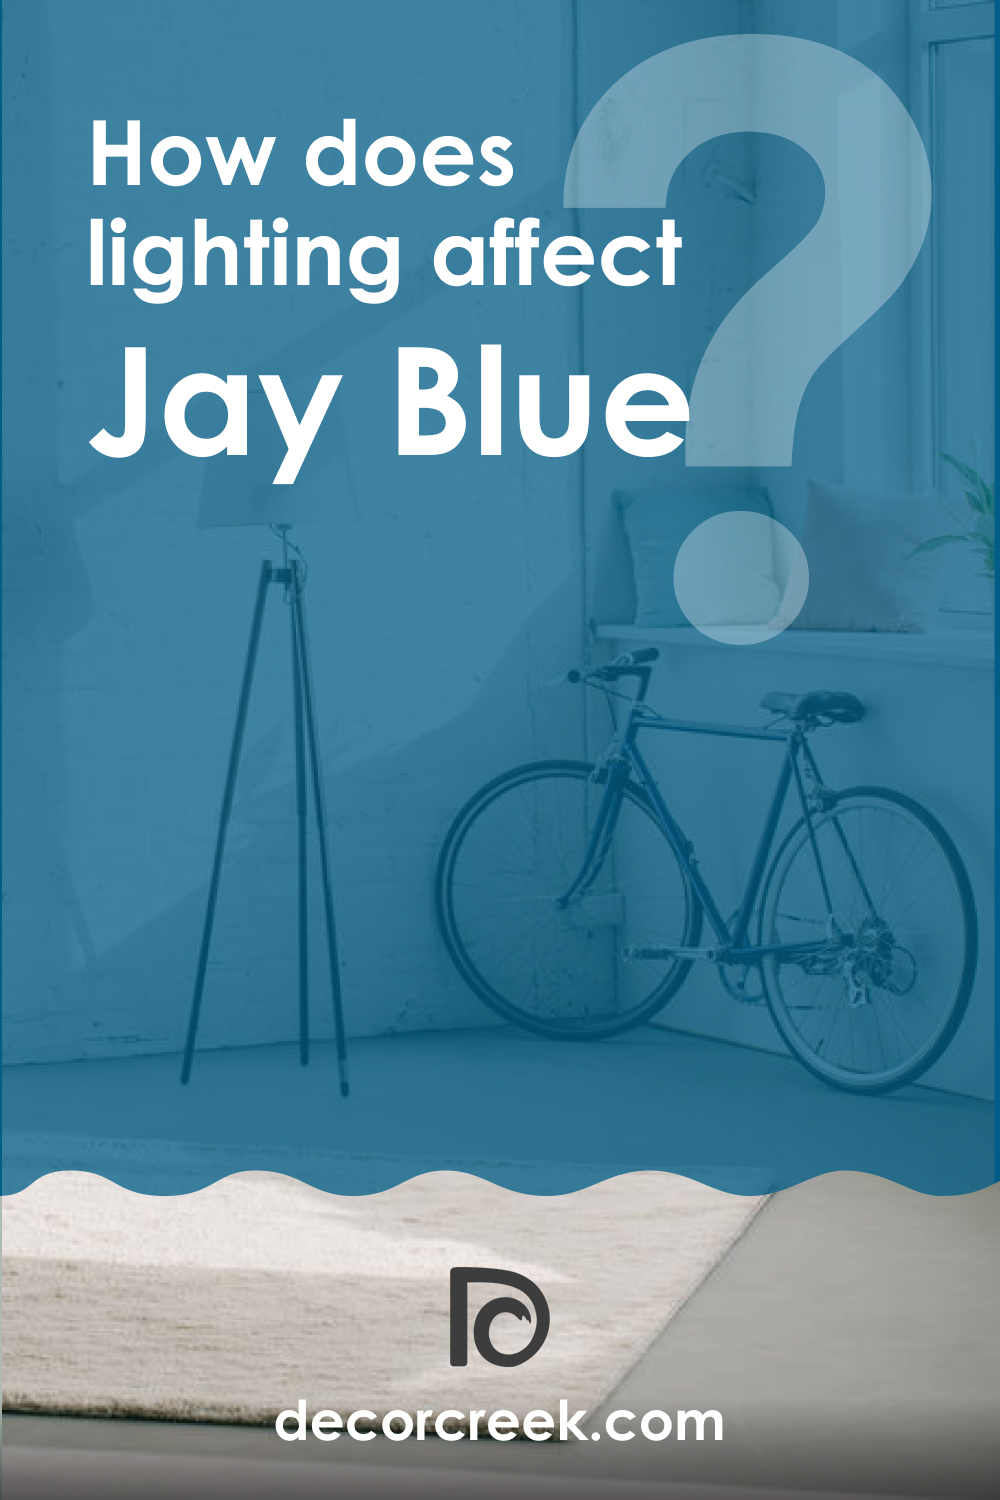 How Does Lighting Affect SW 6797 Jay Blue?